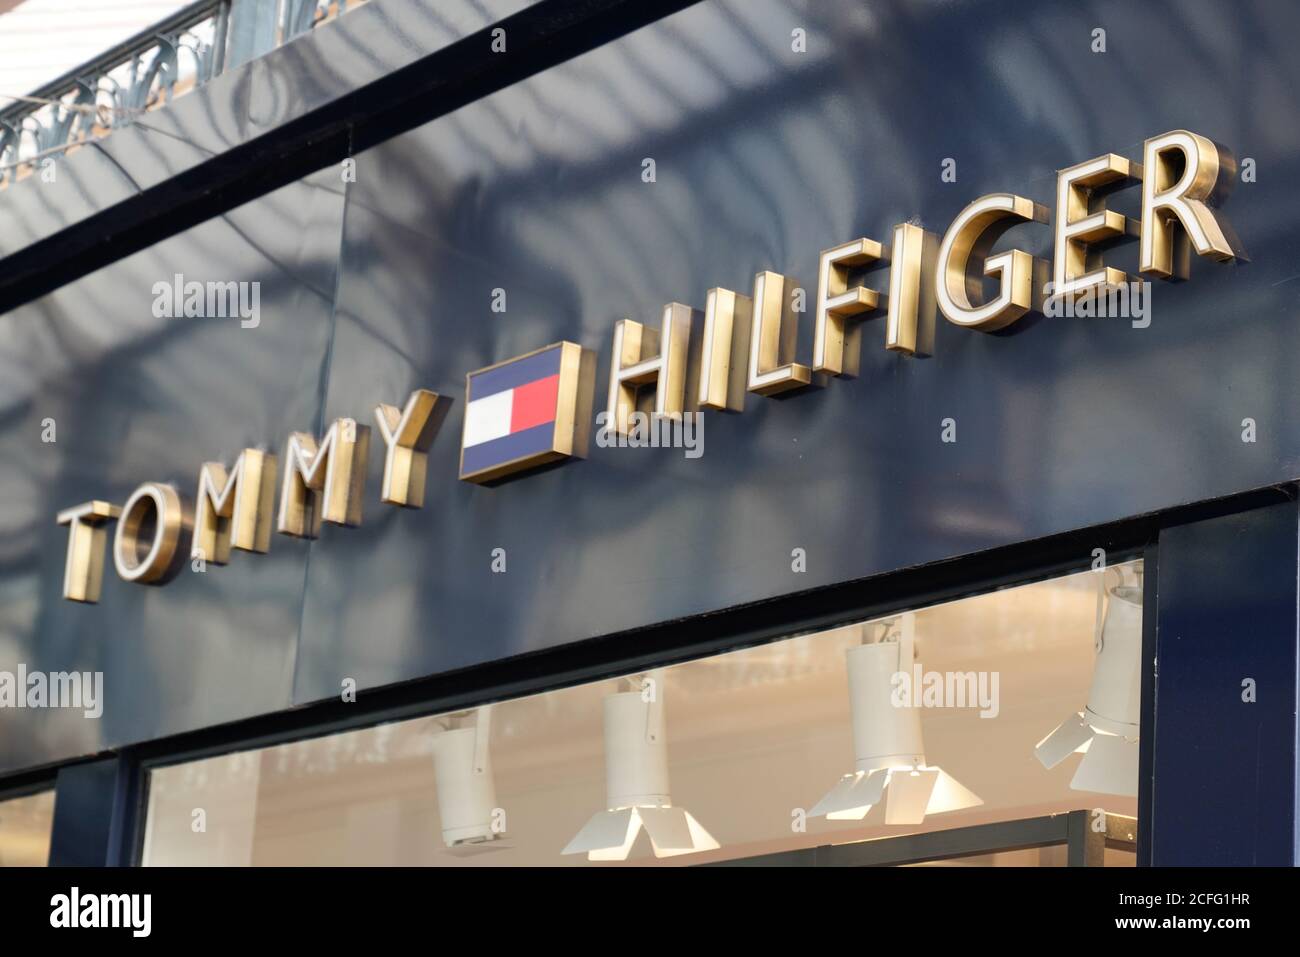 Bordeaux , Aquitaine / France - 09 01 2020 : Tommy Hilfiger logo and text  sign on front of us store for men clothing company shop Stock Photo - Alamy